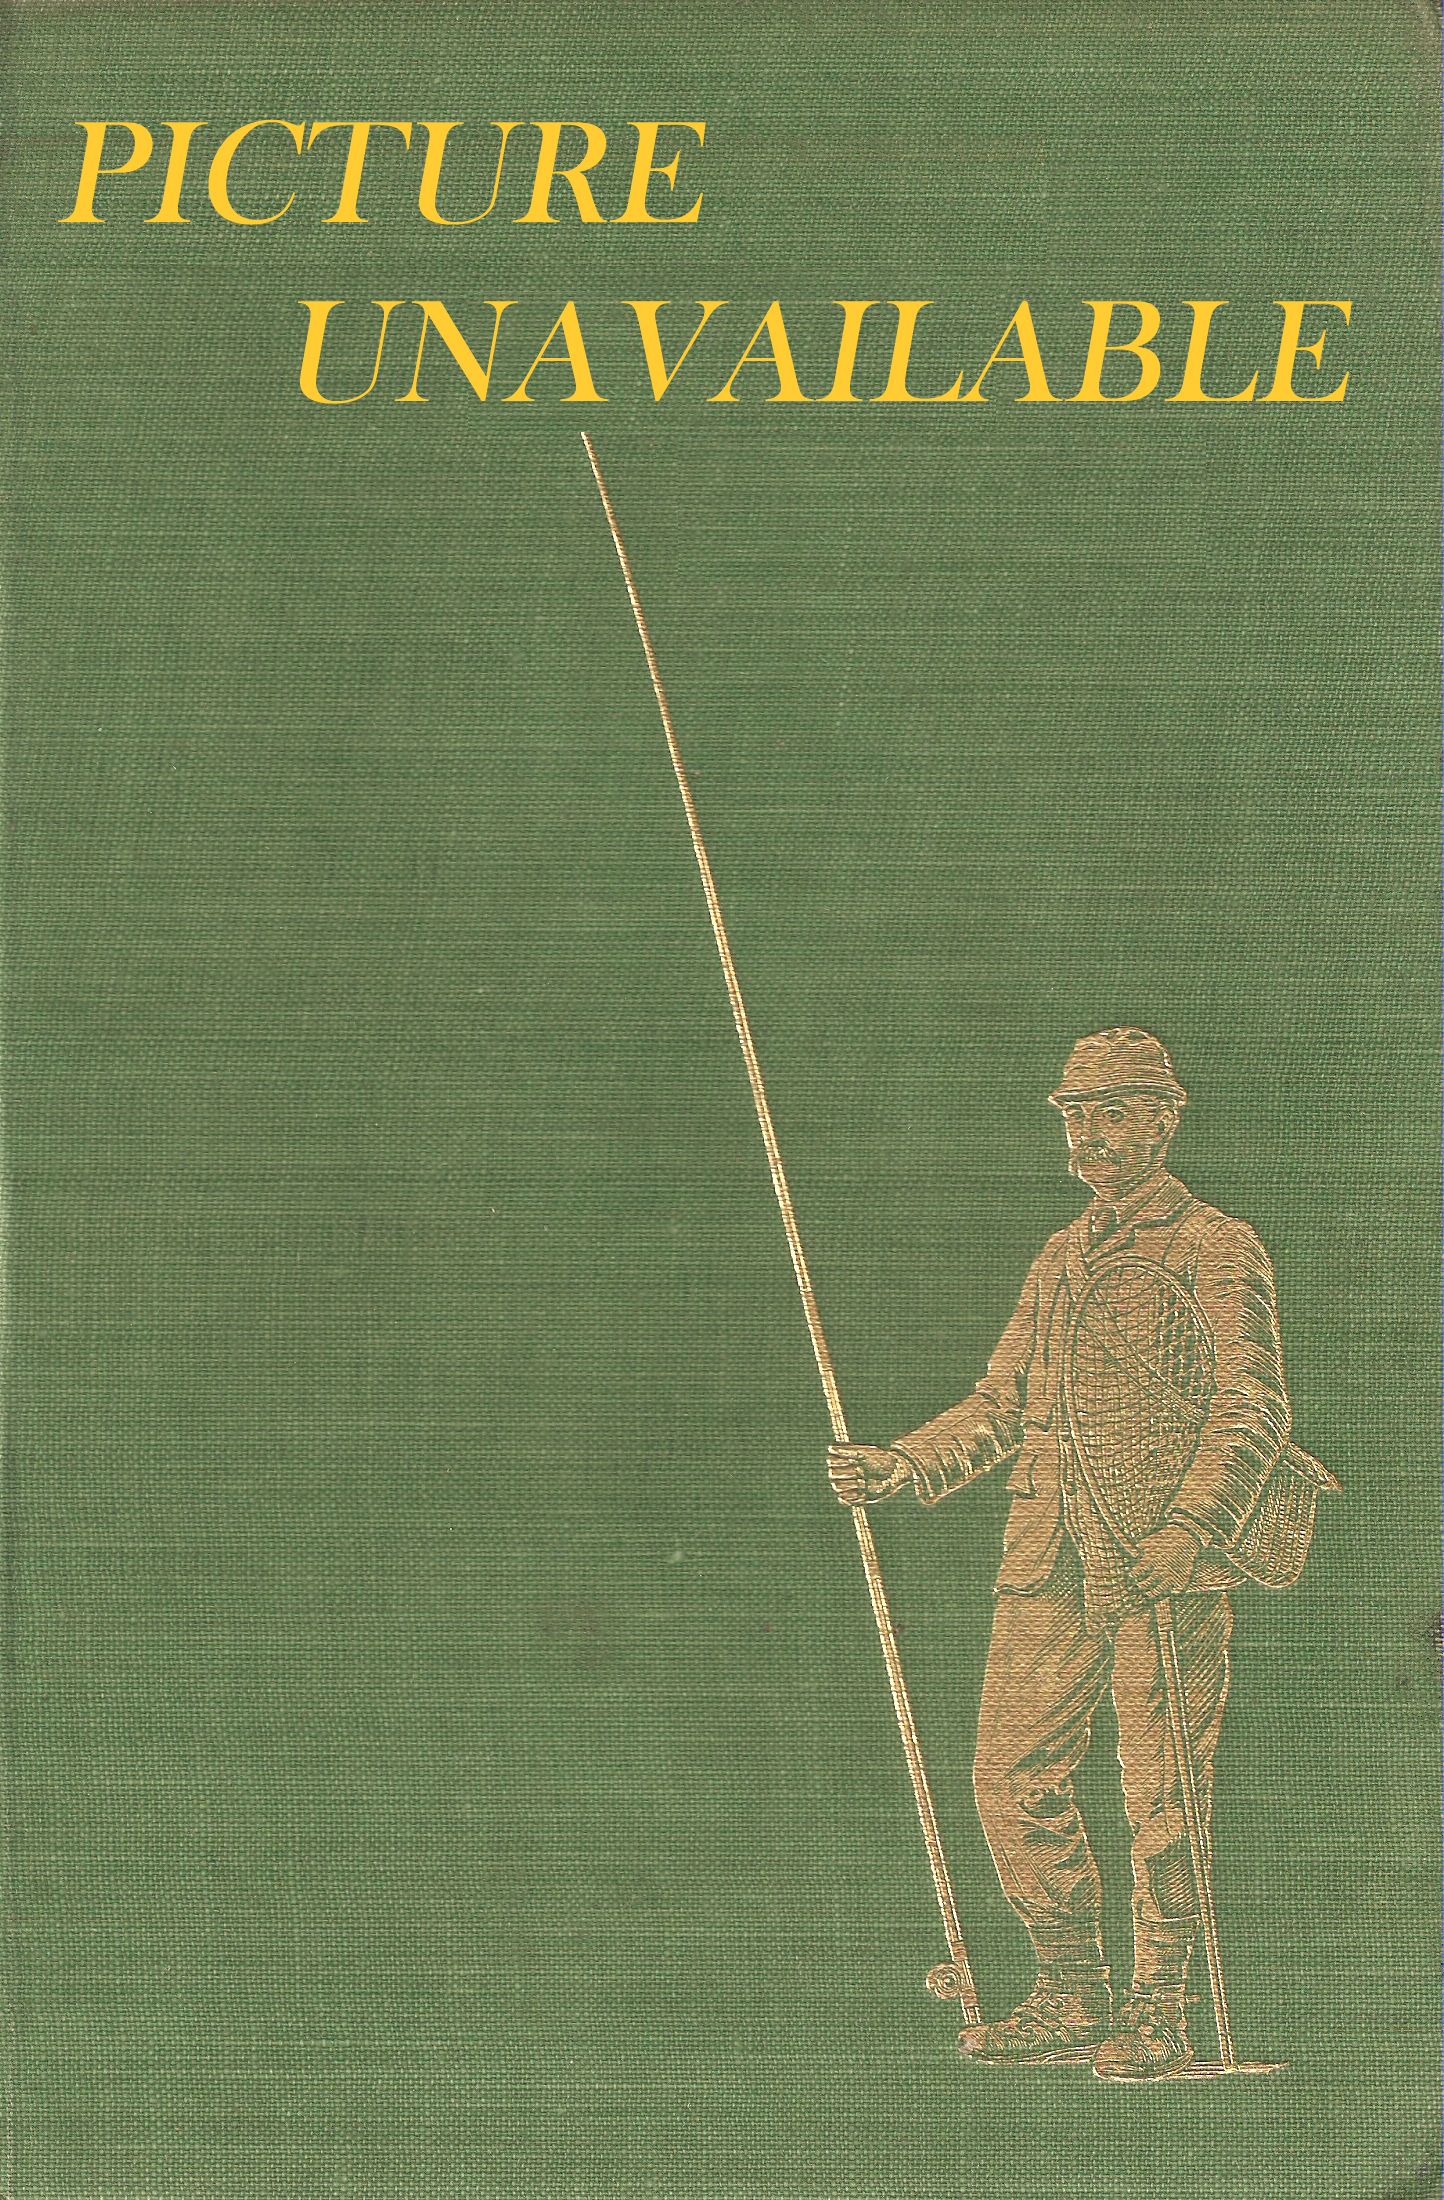 THE COMPLETE FLY-FISHER. Edited by C.F. Walker.